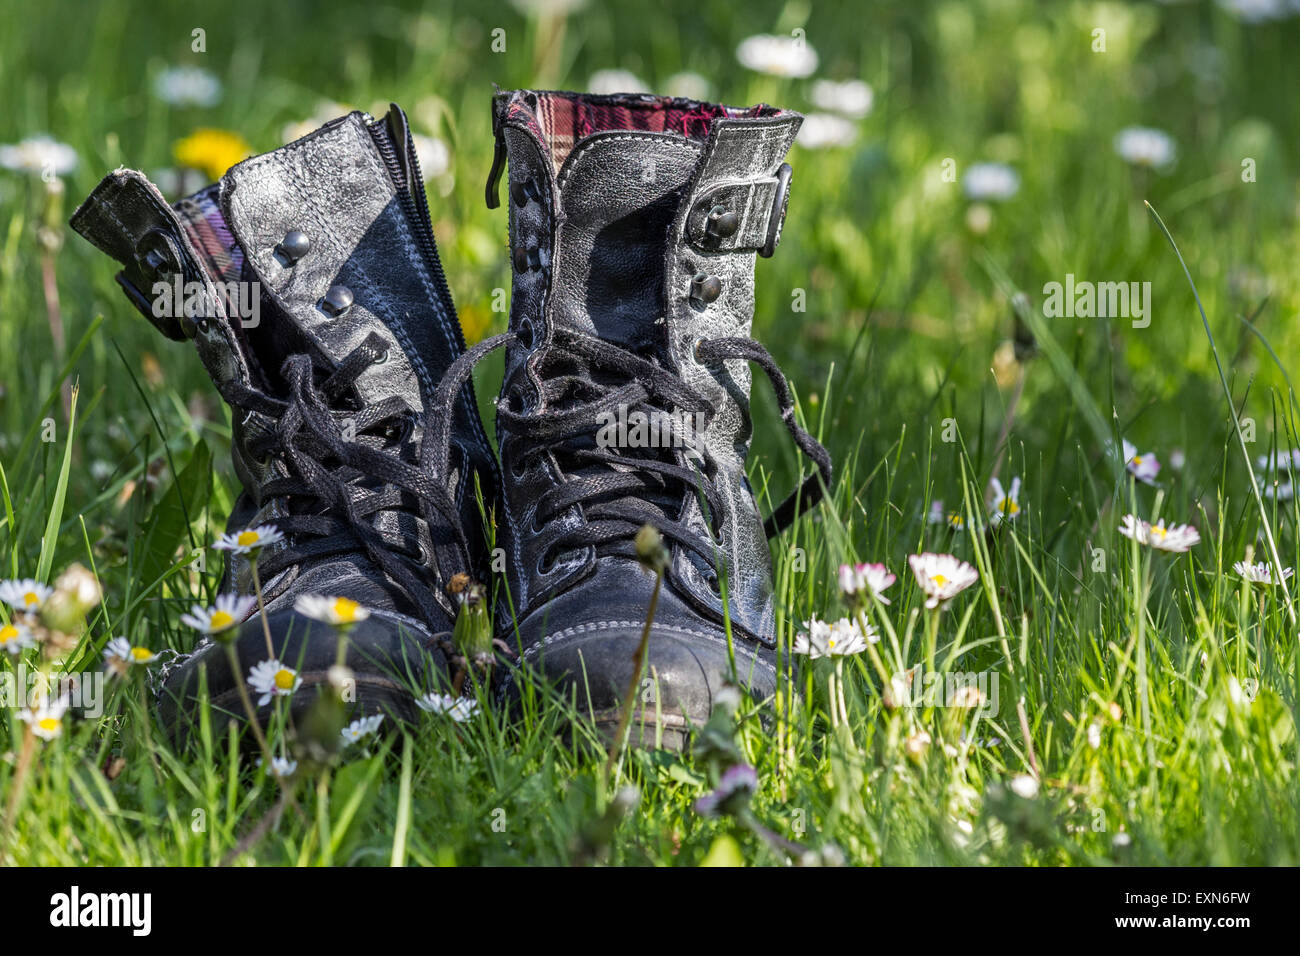 Pair Of Boots Stock Photos & Pair Of Boots Stock Images - Alamy